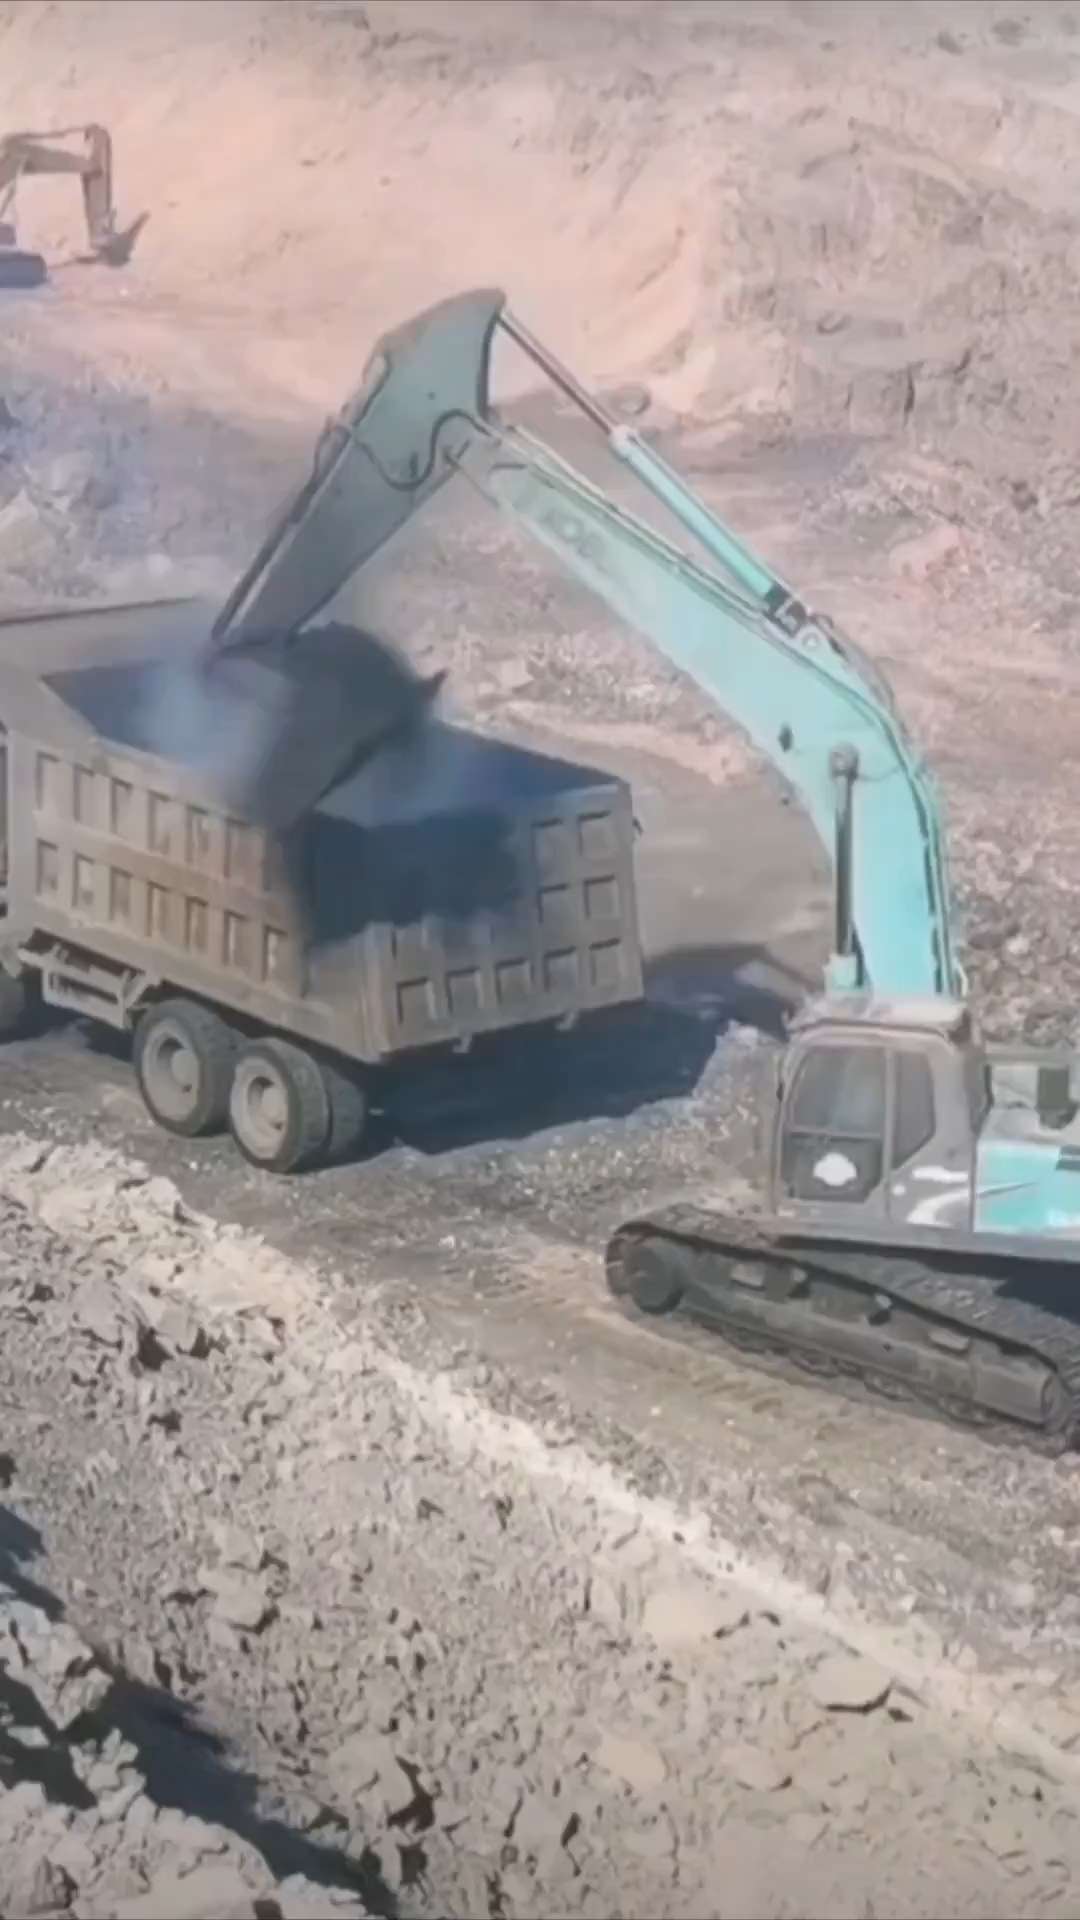 The coal truck is on fire short MP4 video